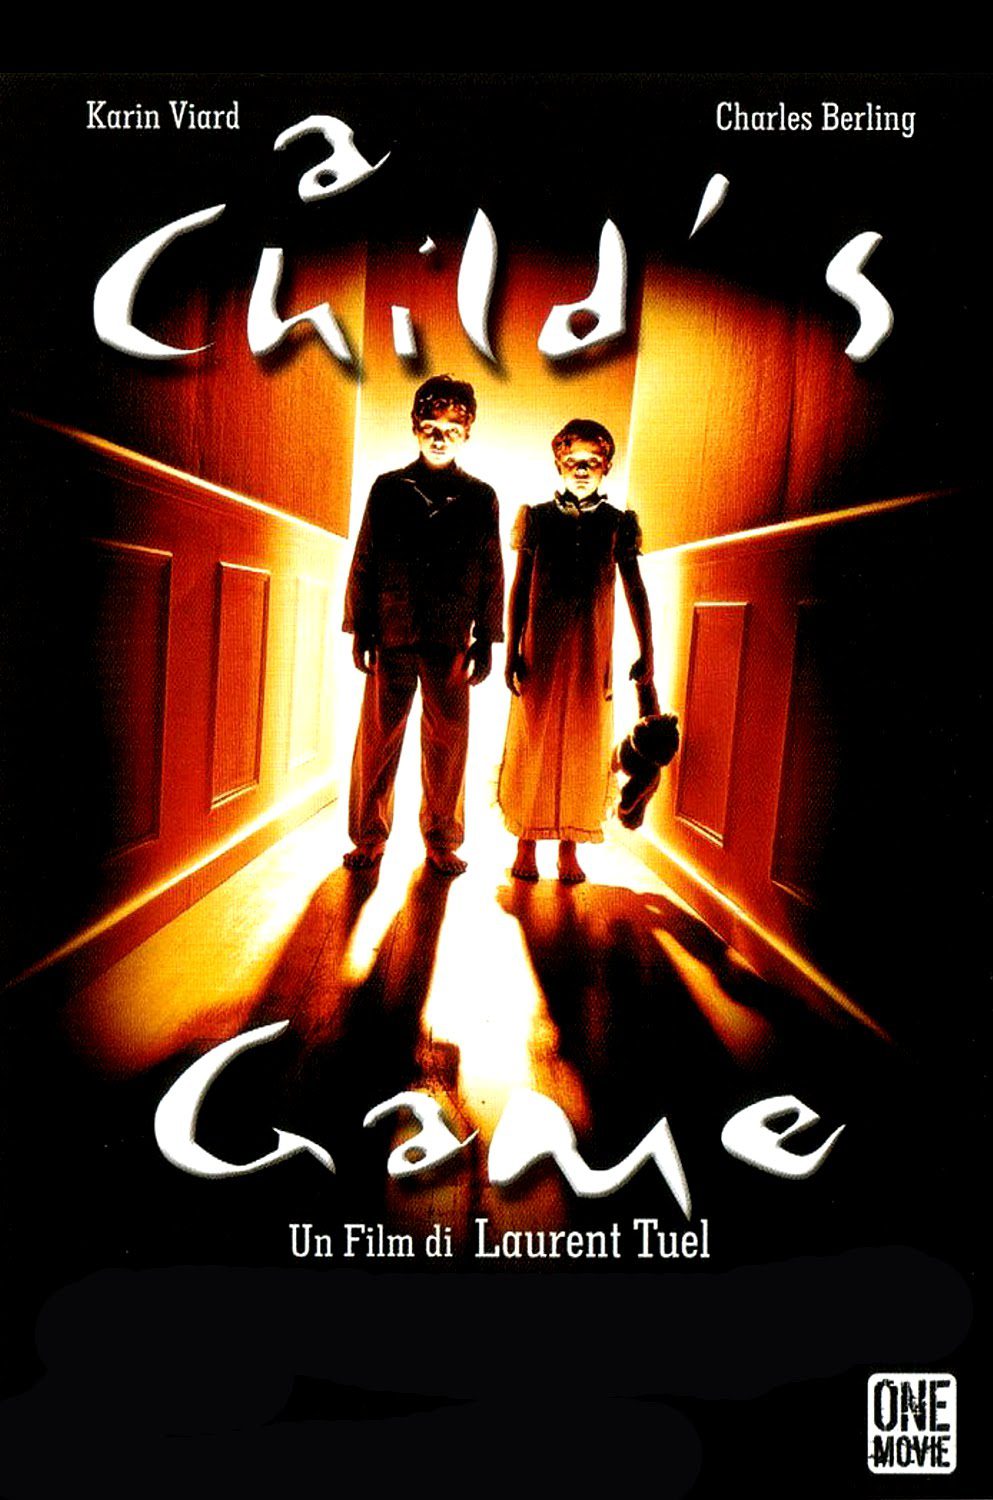 A Child’s Game (2001)